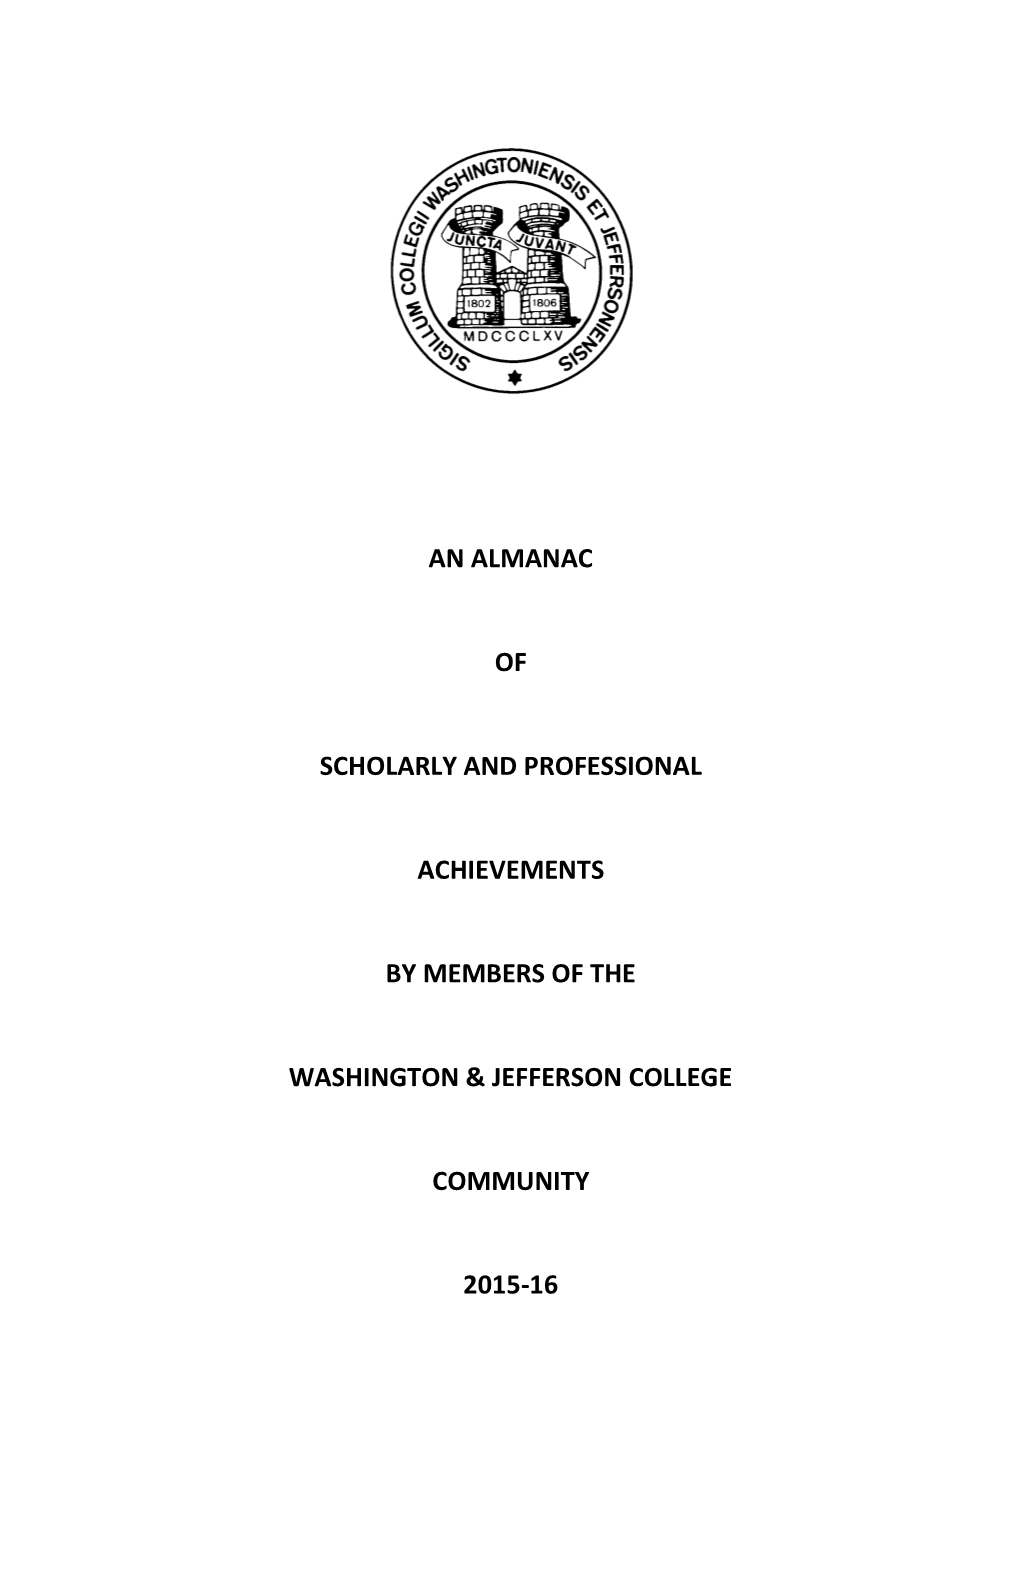 An Almanac of Scholarly and Professional Achievements